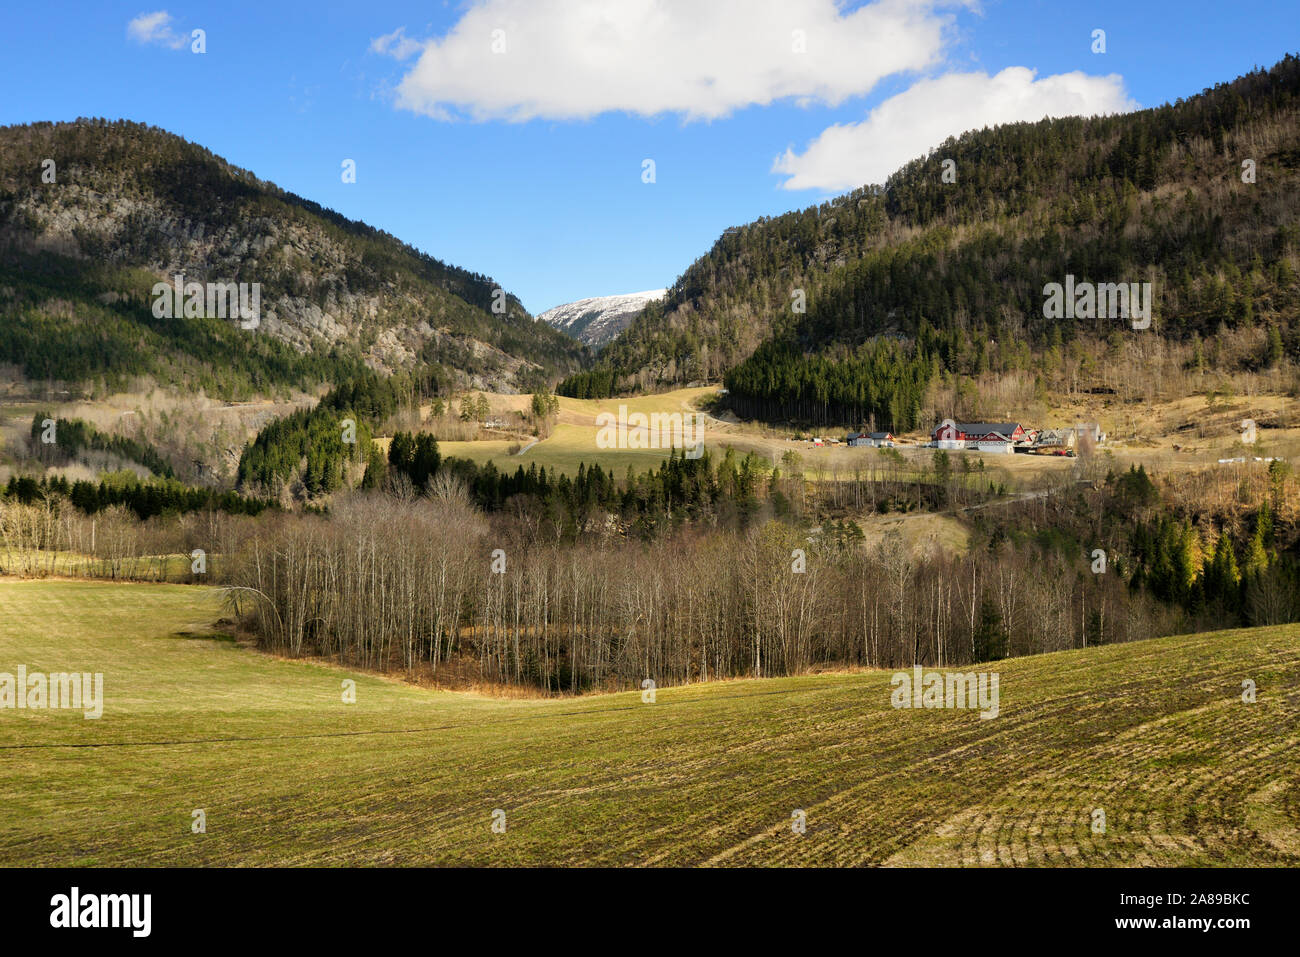 Forests in the Western Fjords. Bergen county, Norway Stock Photo